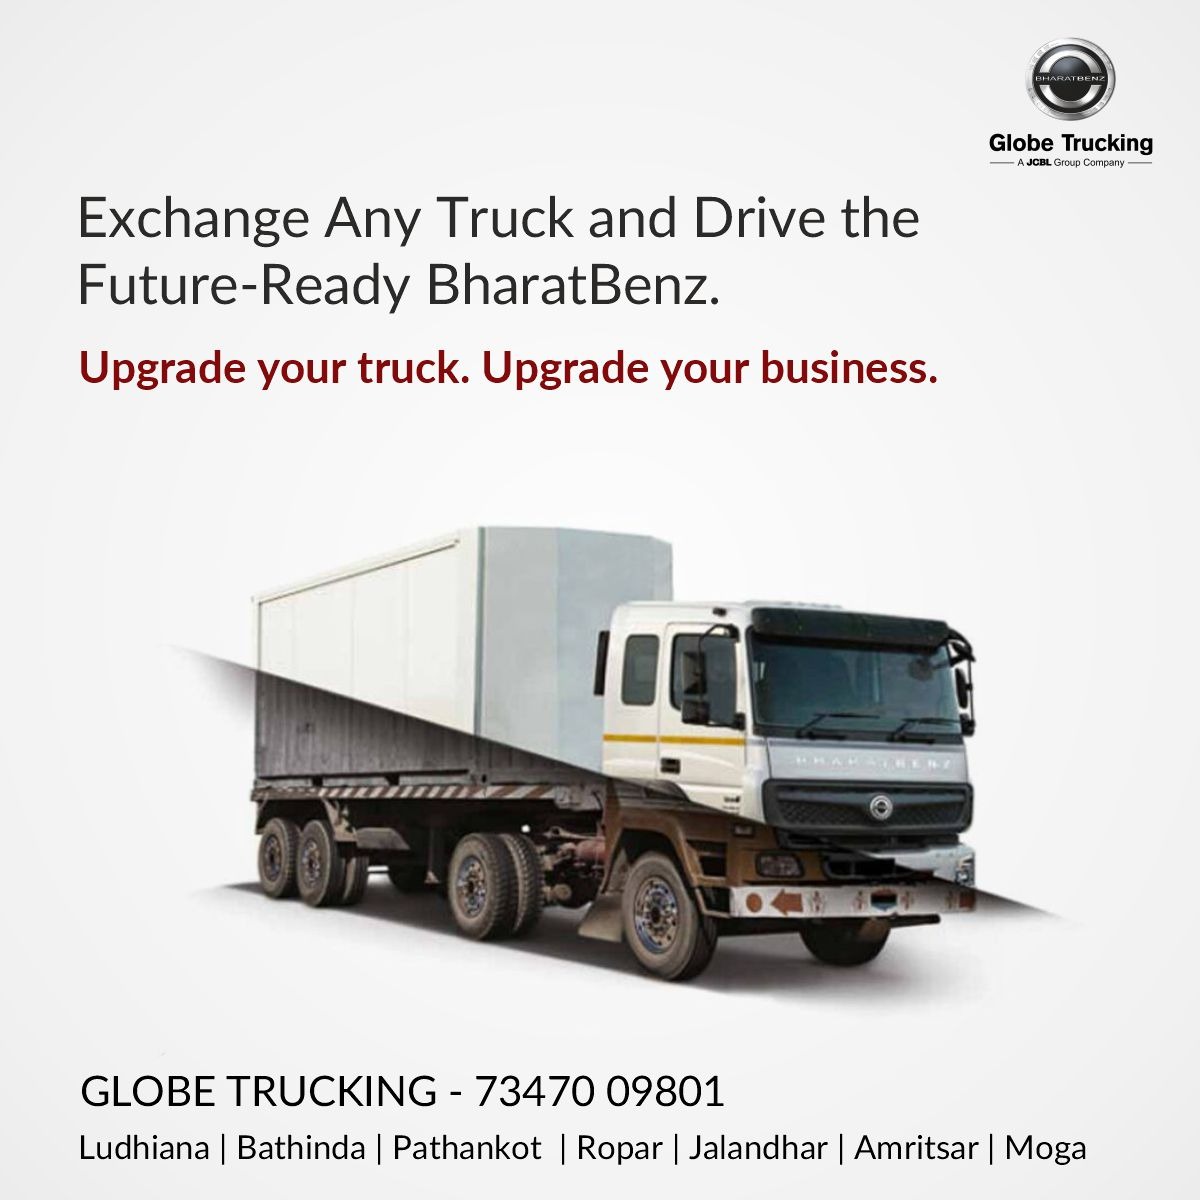 More power to you with #BharatBenz #TruckExchange Program. 😃

Now  buy or exchange #usedtruck of any brand with complete ease.😁

Globe Trucking: 7347009801. 📲

#BharatBenzExchange #UpgradeYourTruck #GlobeTrucking #BharatbenzDealer #PunjabTruck #TruckDealer   #exchangetruck